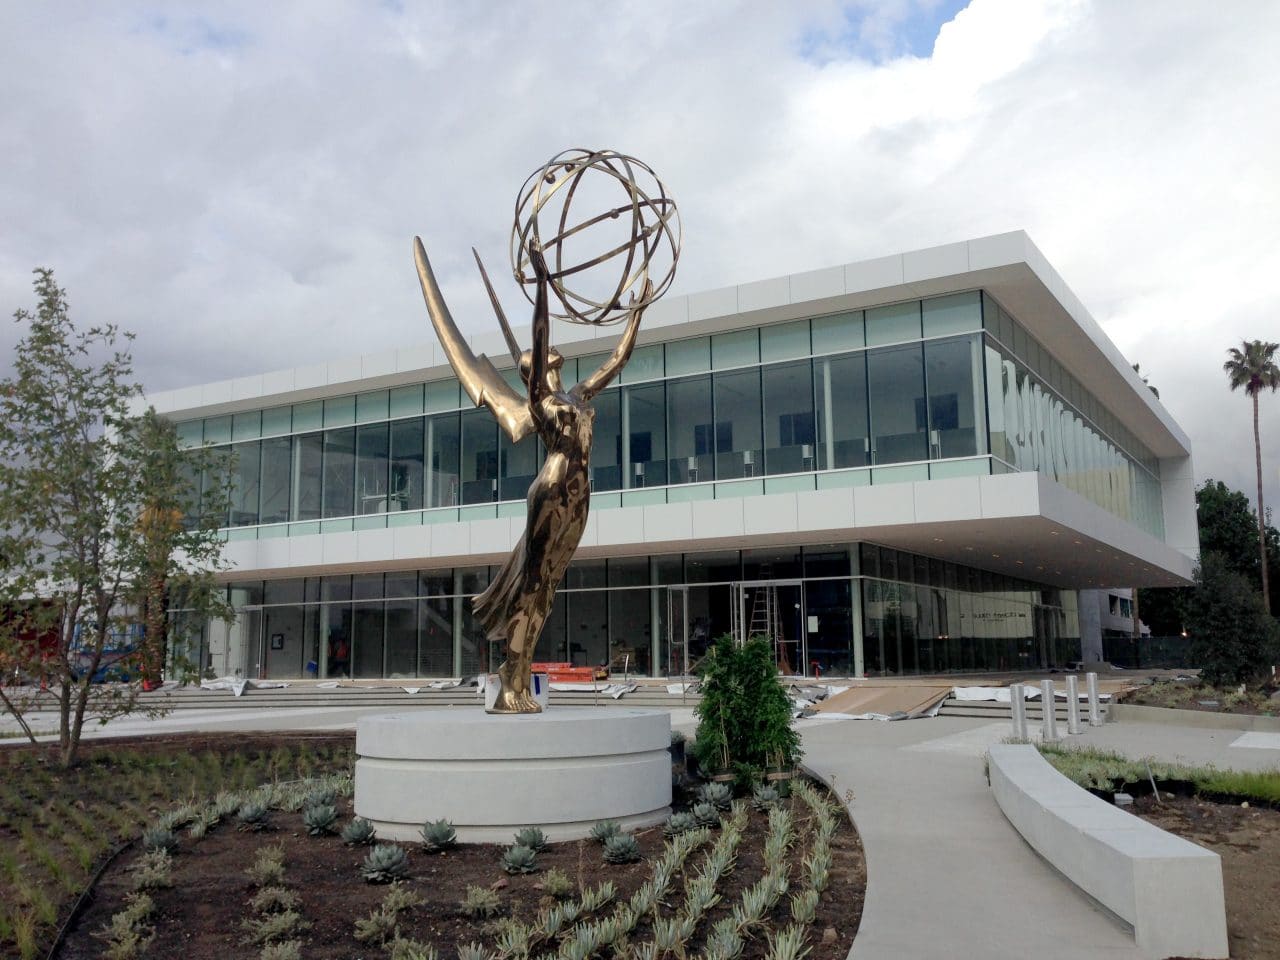 Television Academy Hires Diversity Consultant ReadySet to Analyze Practices and Create Action Plan